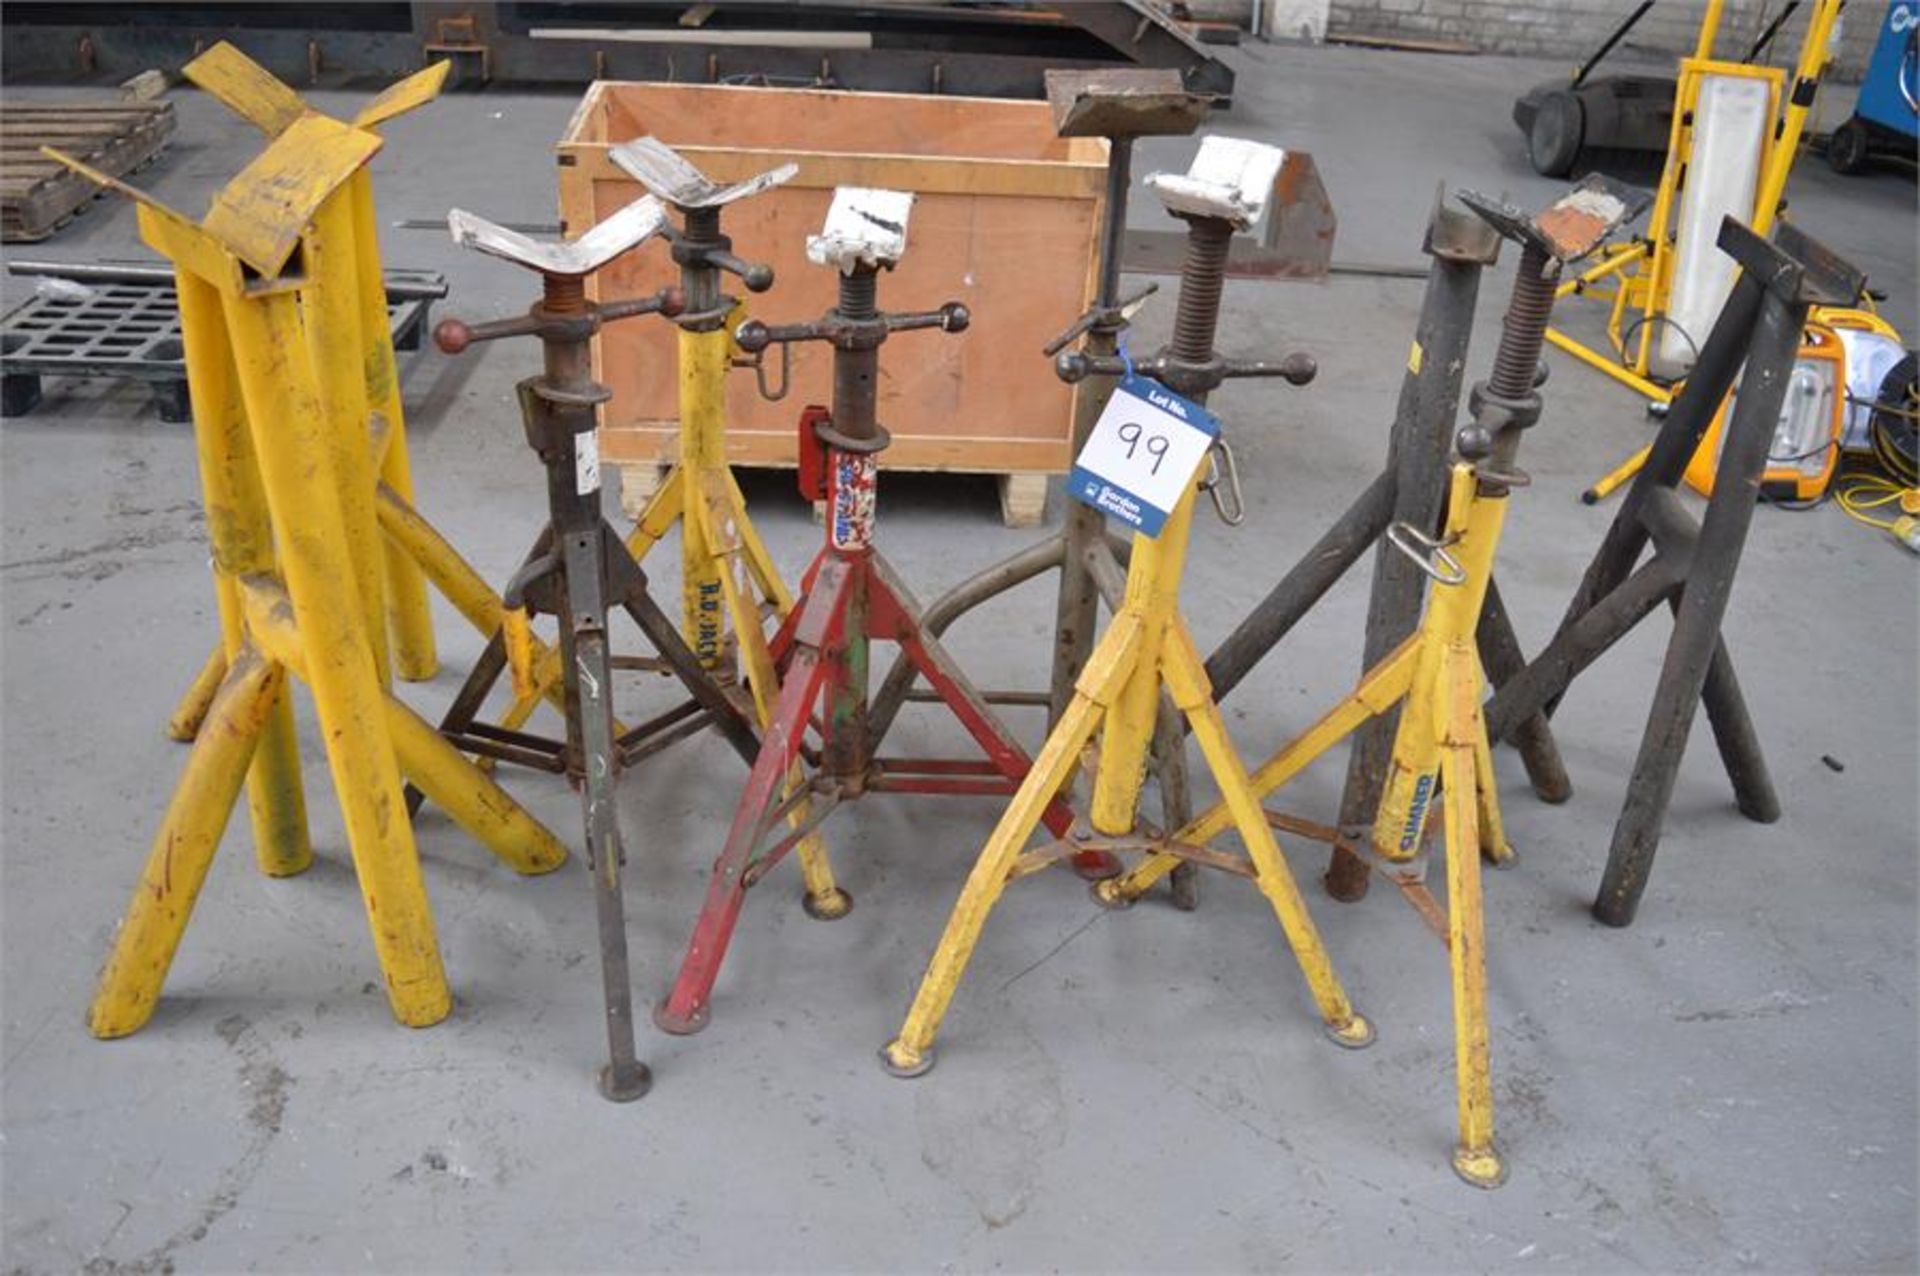 10 x various jacks & stands, as lotted